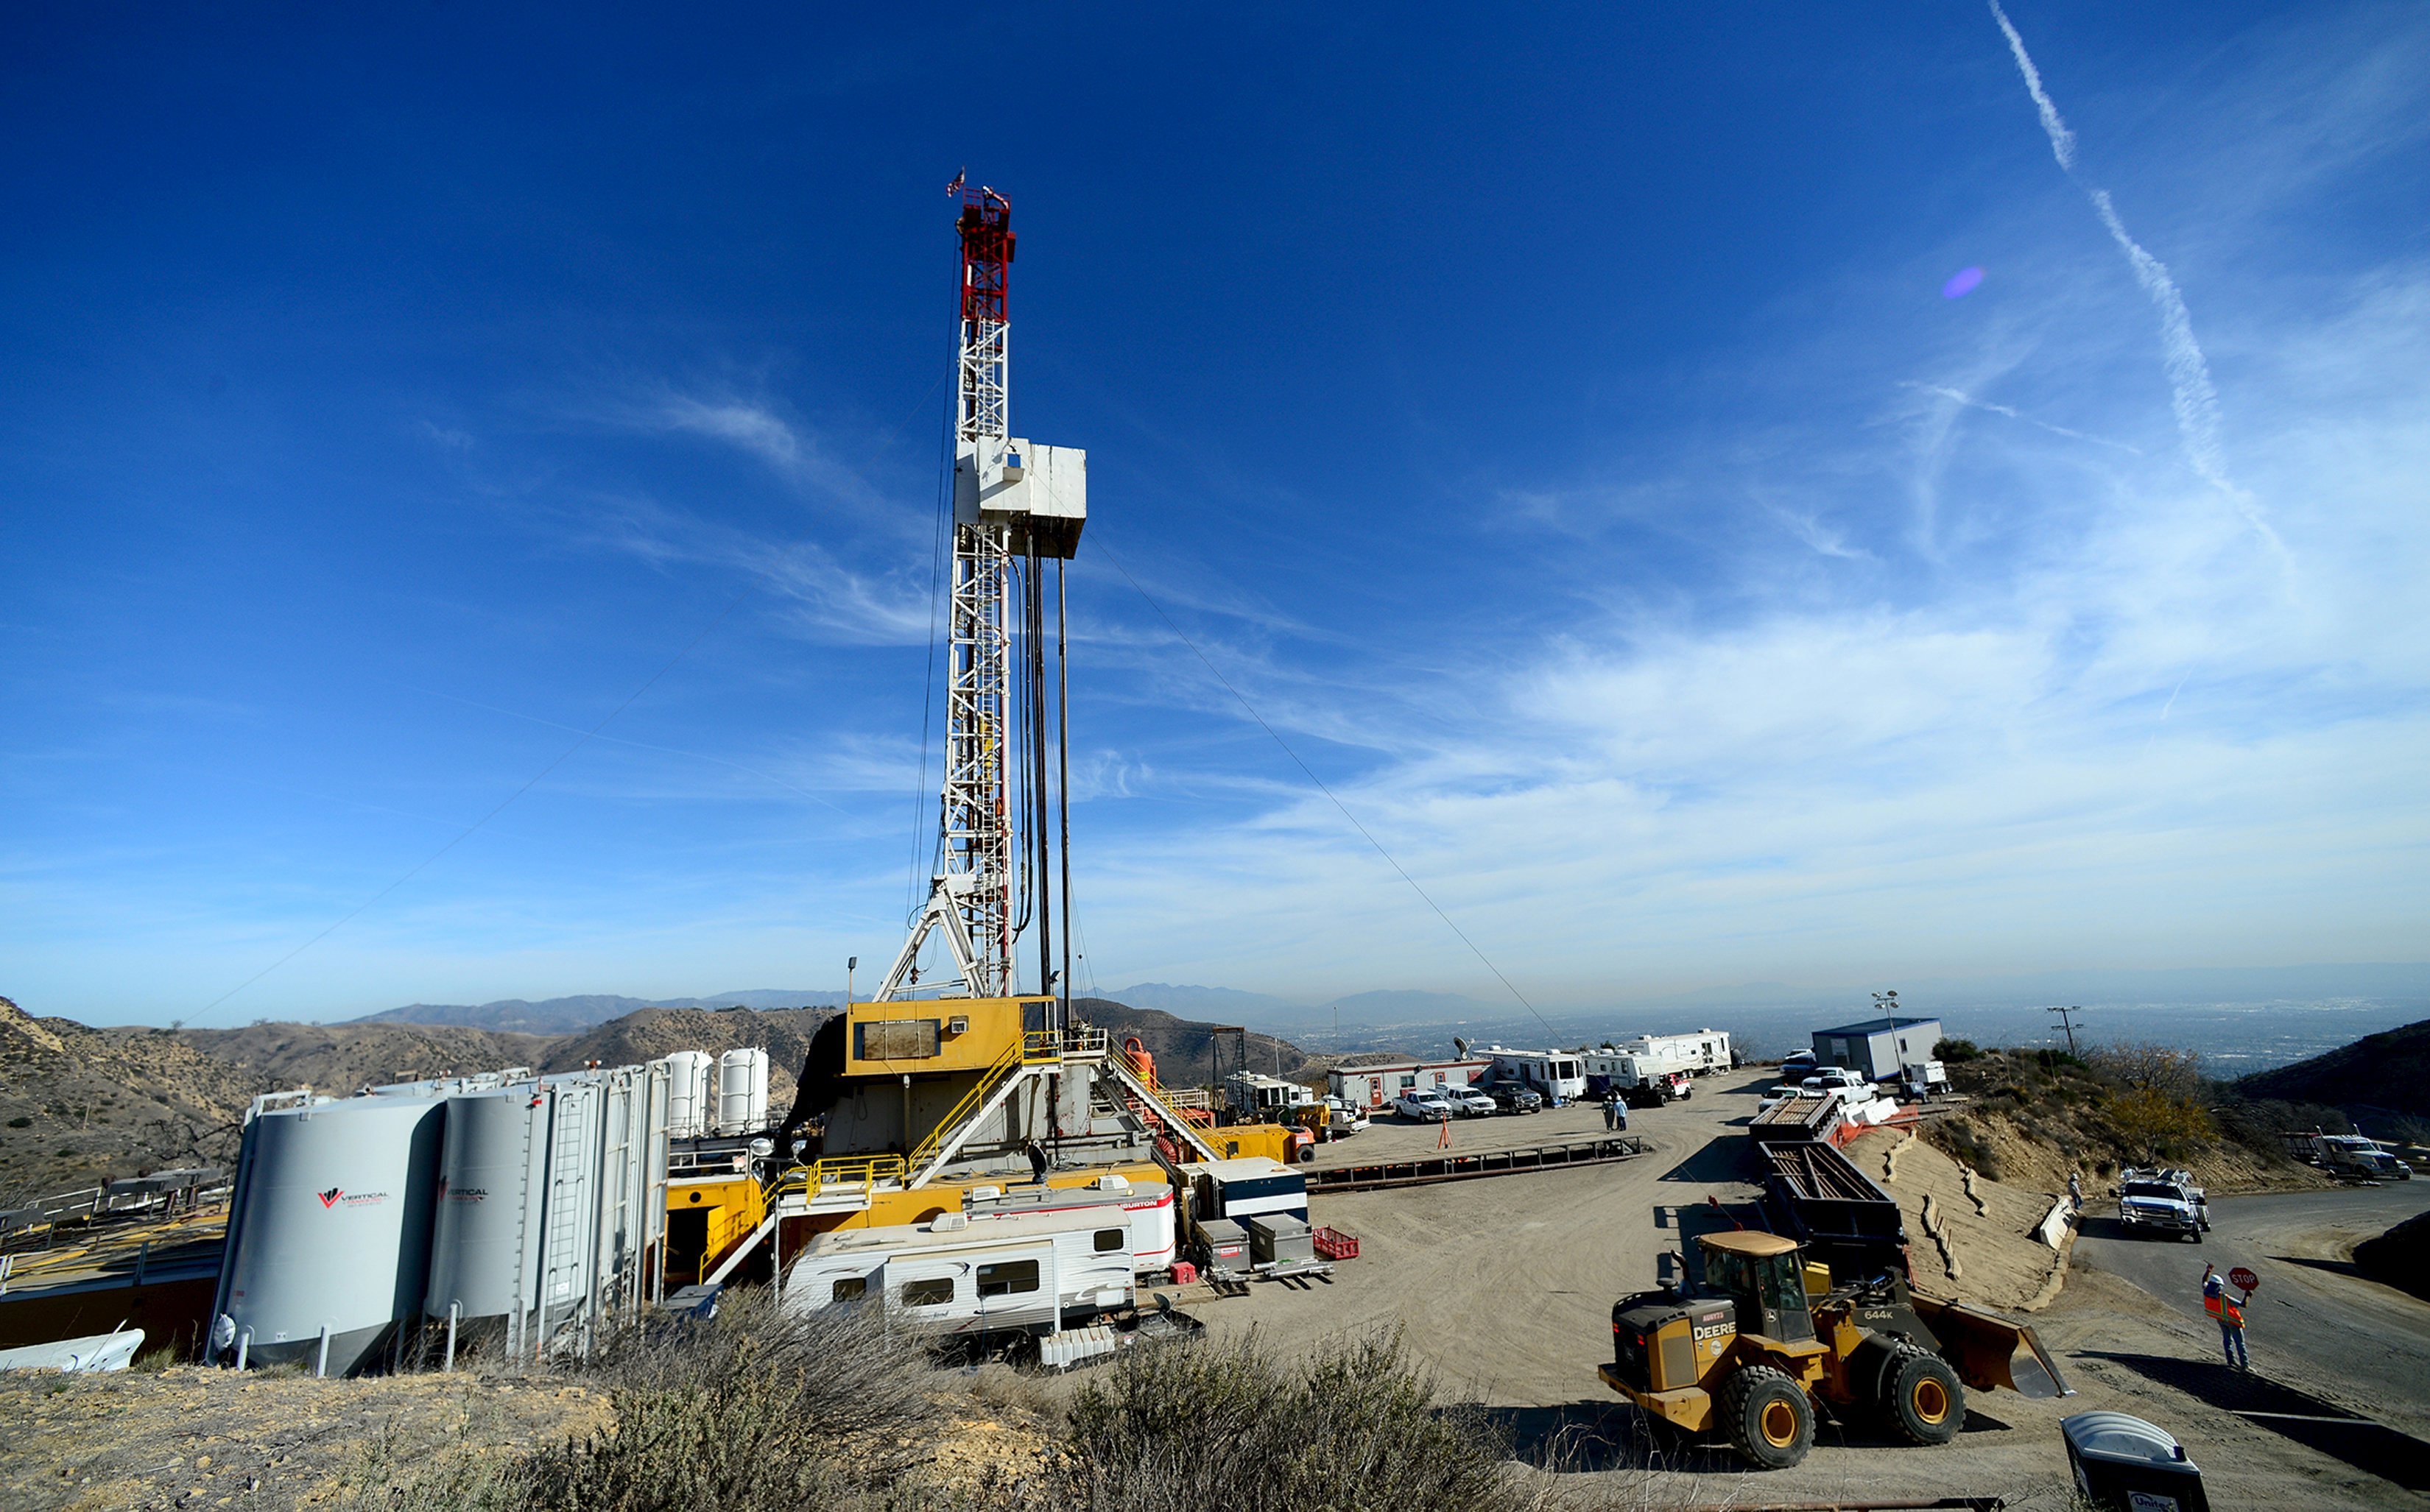 The California Methane Gas Leak Was the Worst in US History The